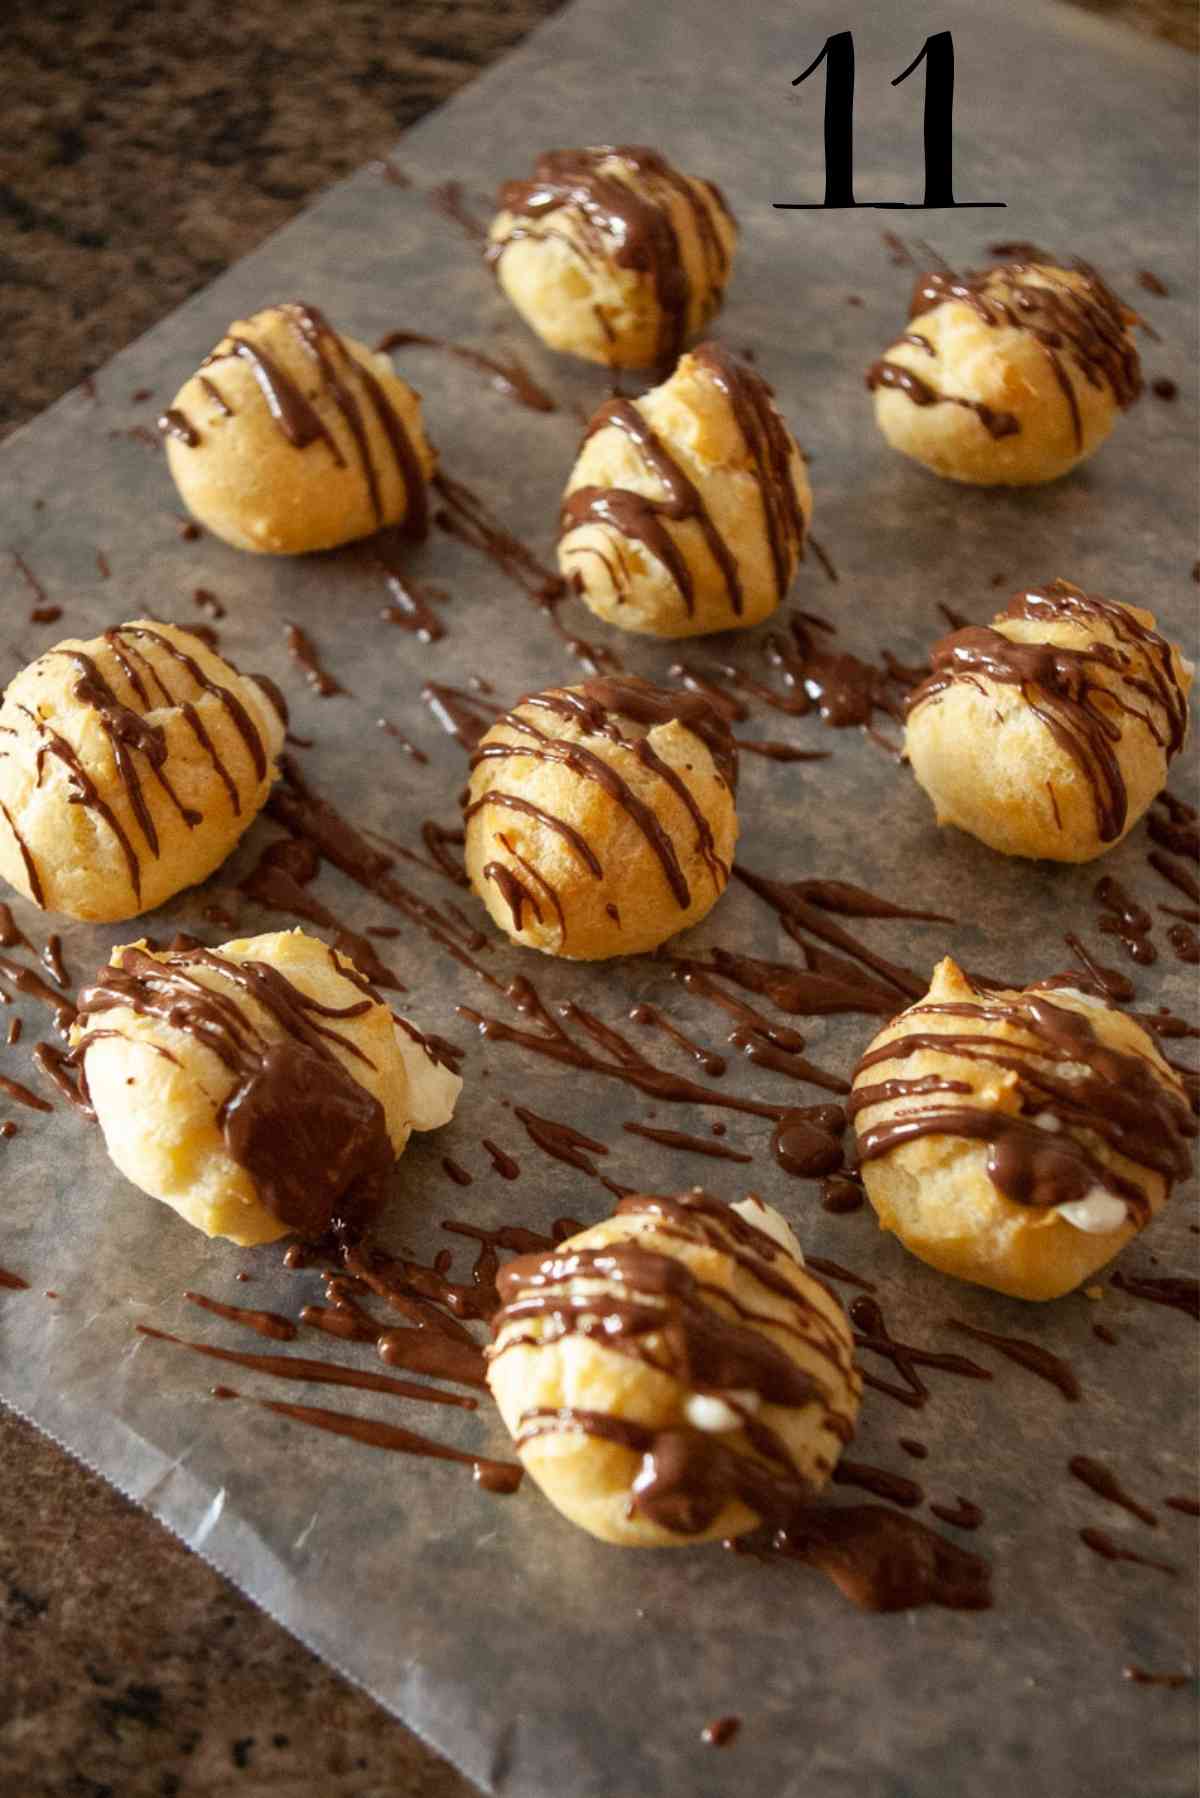 Warm chocolate drizzled over the freshly filled cream puffs.